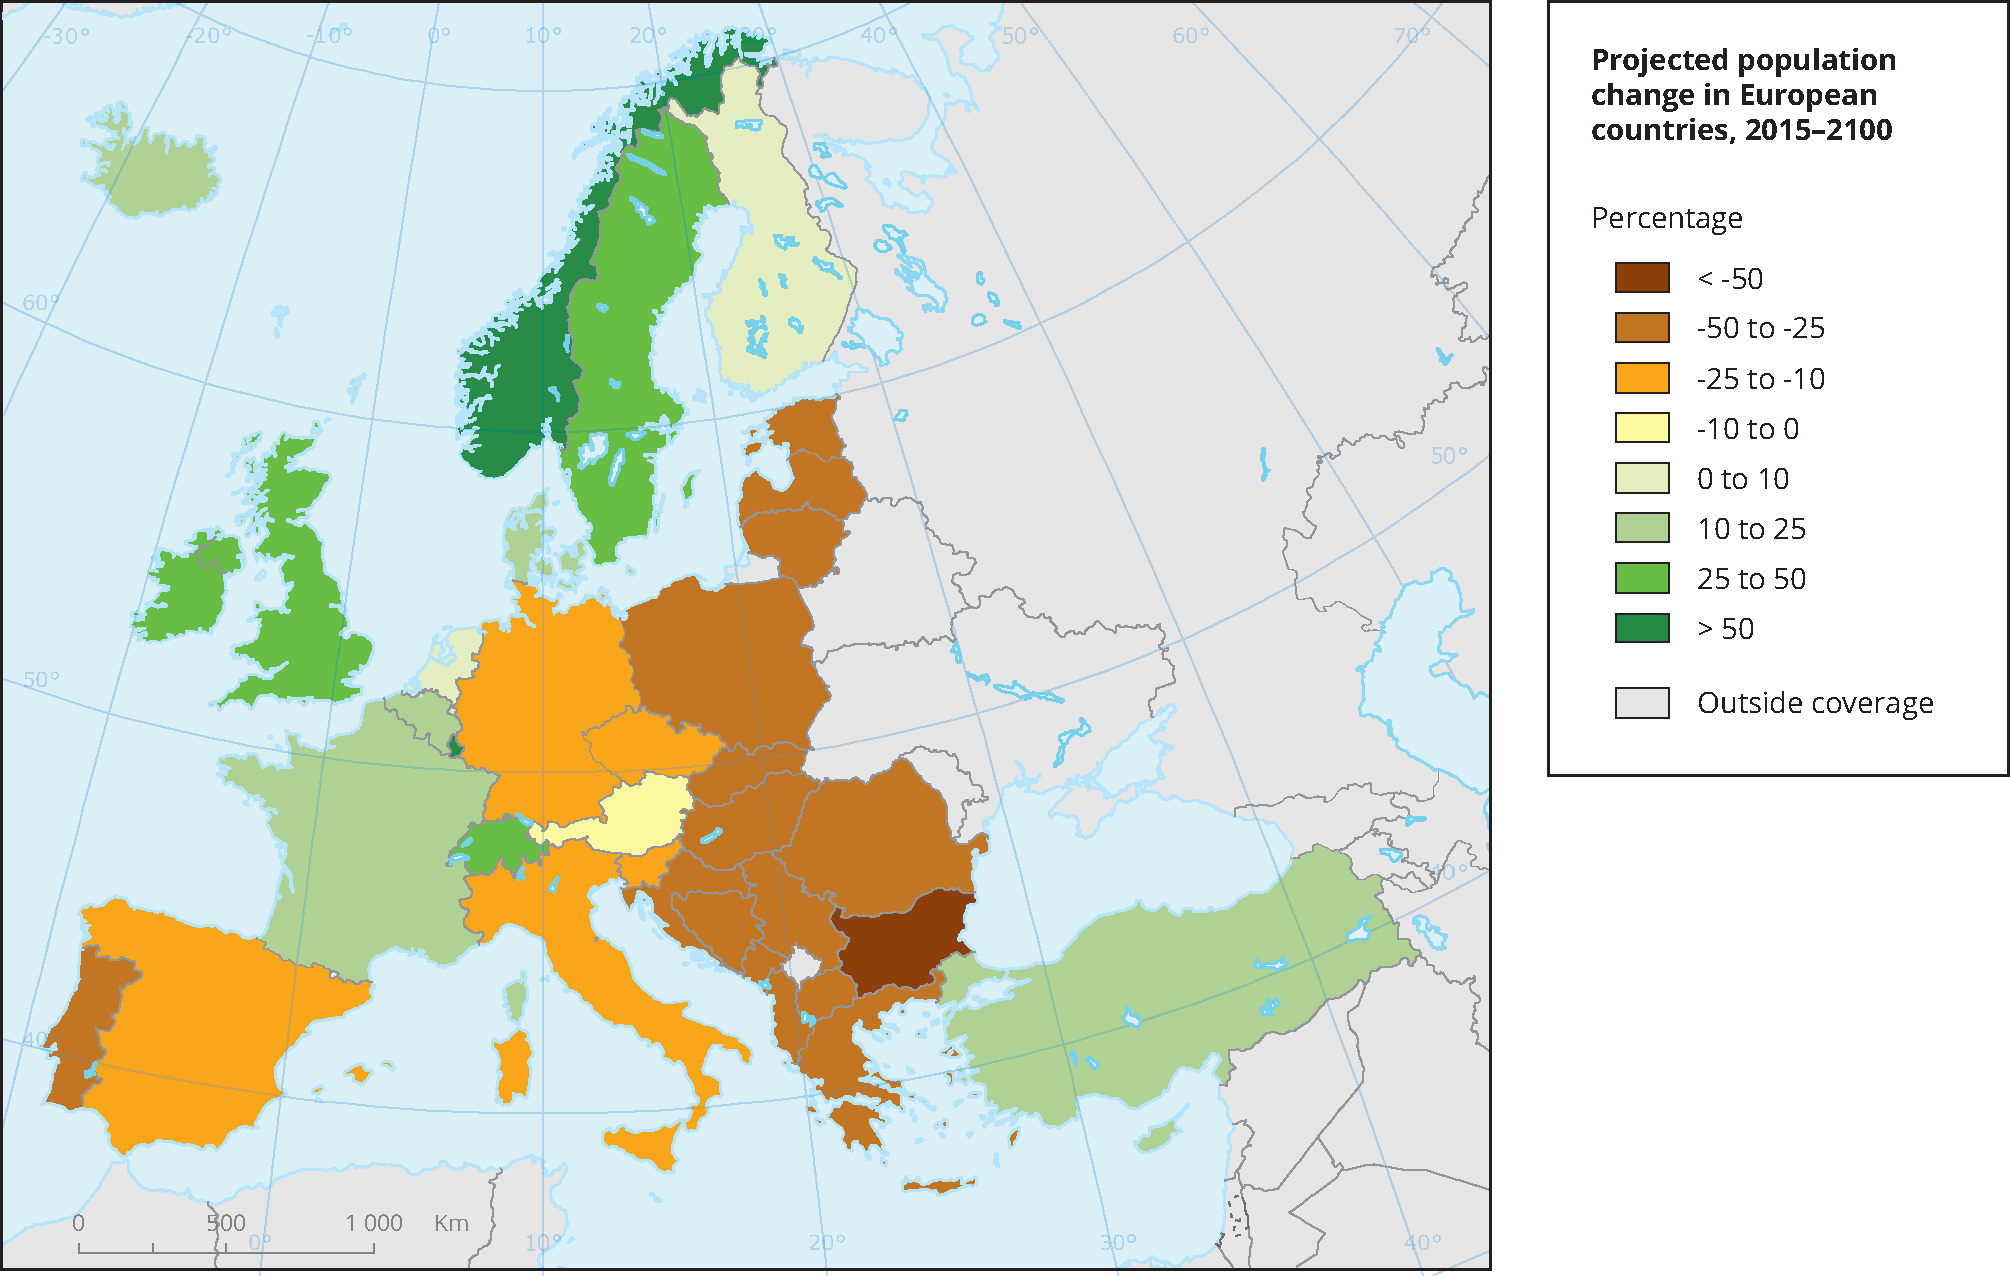 Projected population change in European countries, 2015 to 2100